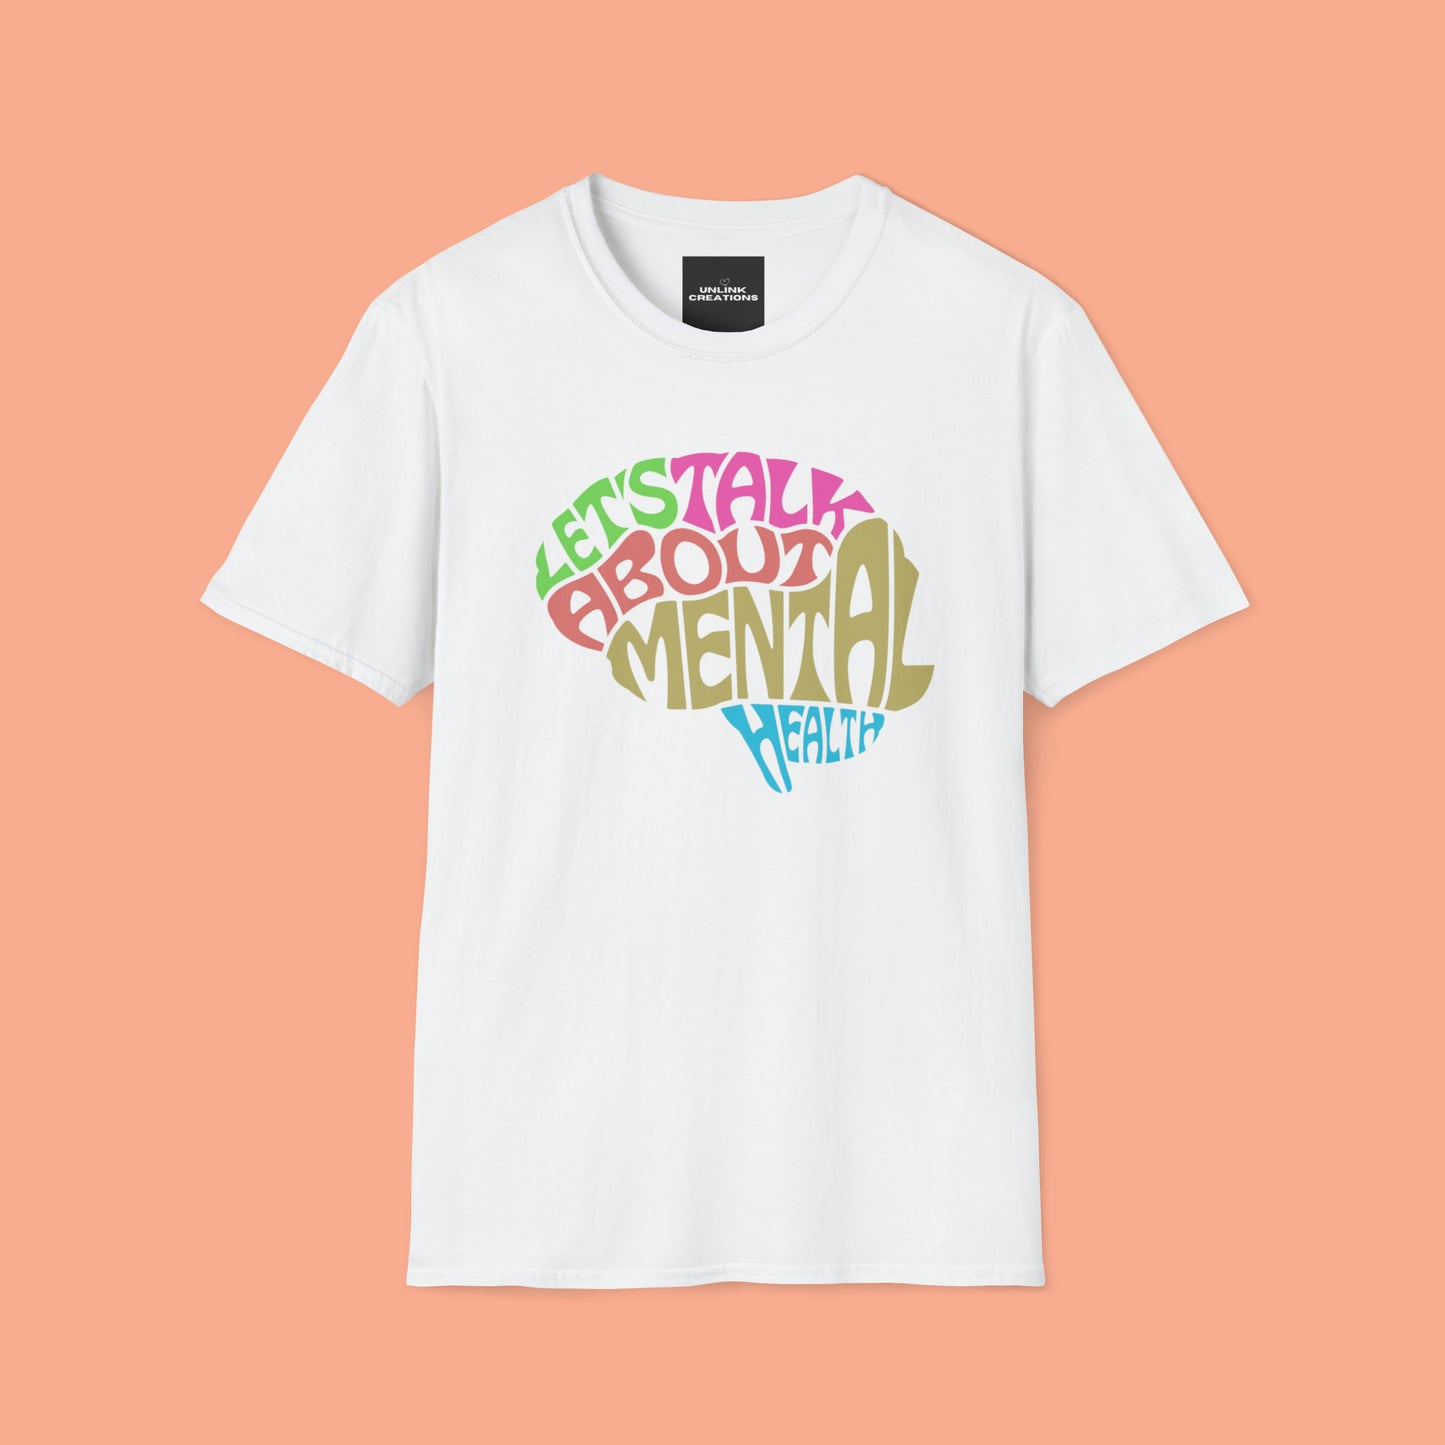 The CDC states "Mental health is important at every stage of life, from childhood and adolescence through adulthood.” I can’t agree more so “LET’S TALK ABOUT MENTAL HEALTH” is the message of this Unisex Softstyle T-Shirt design.